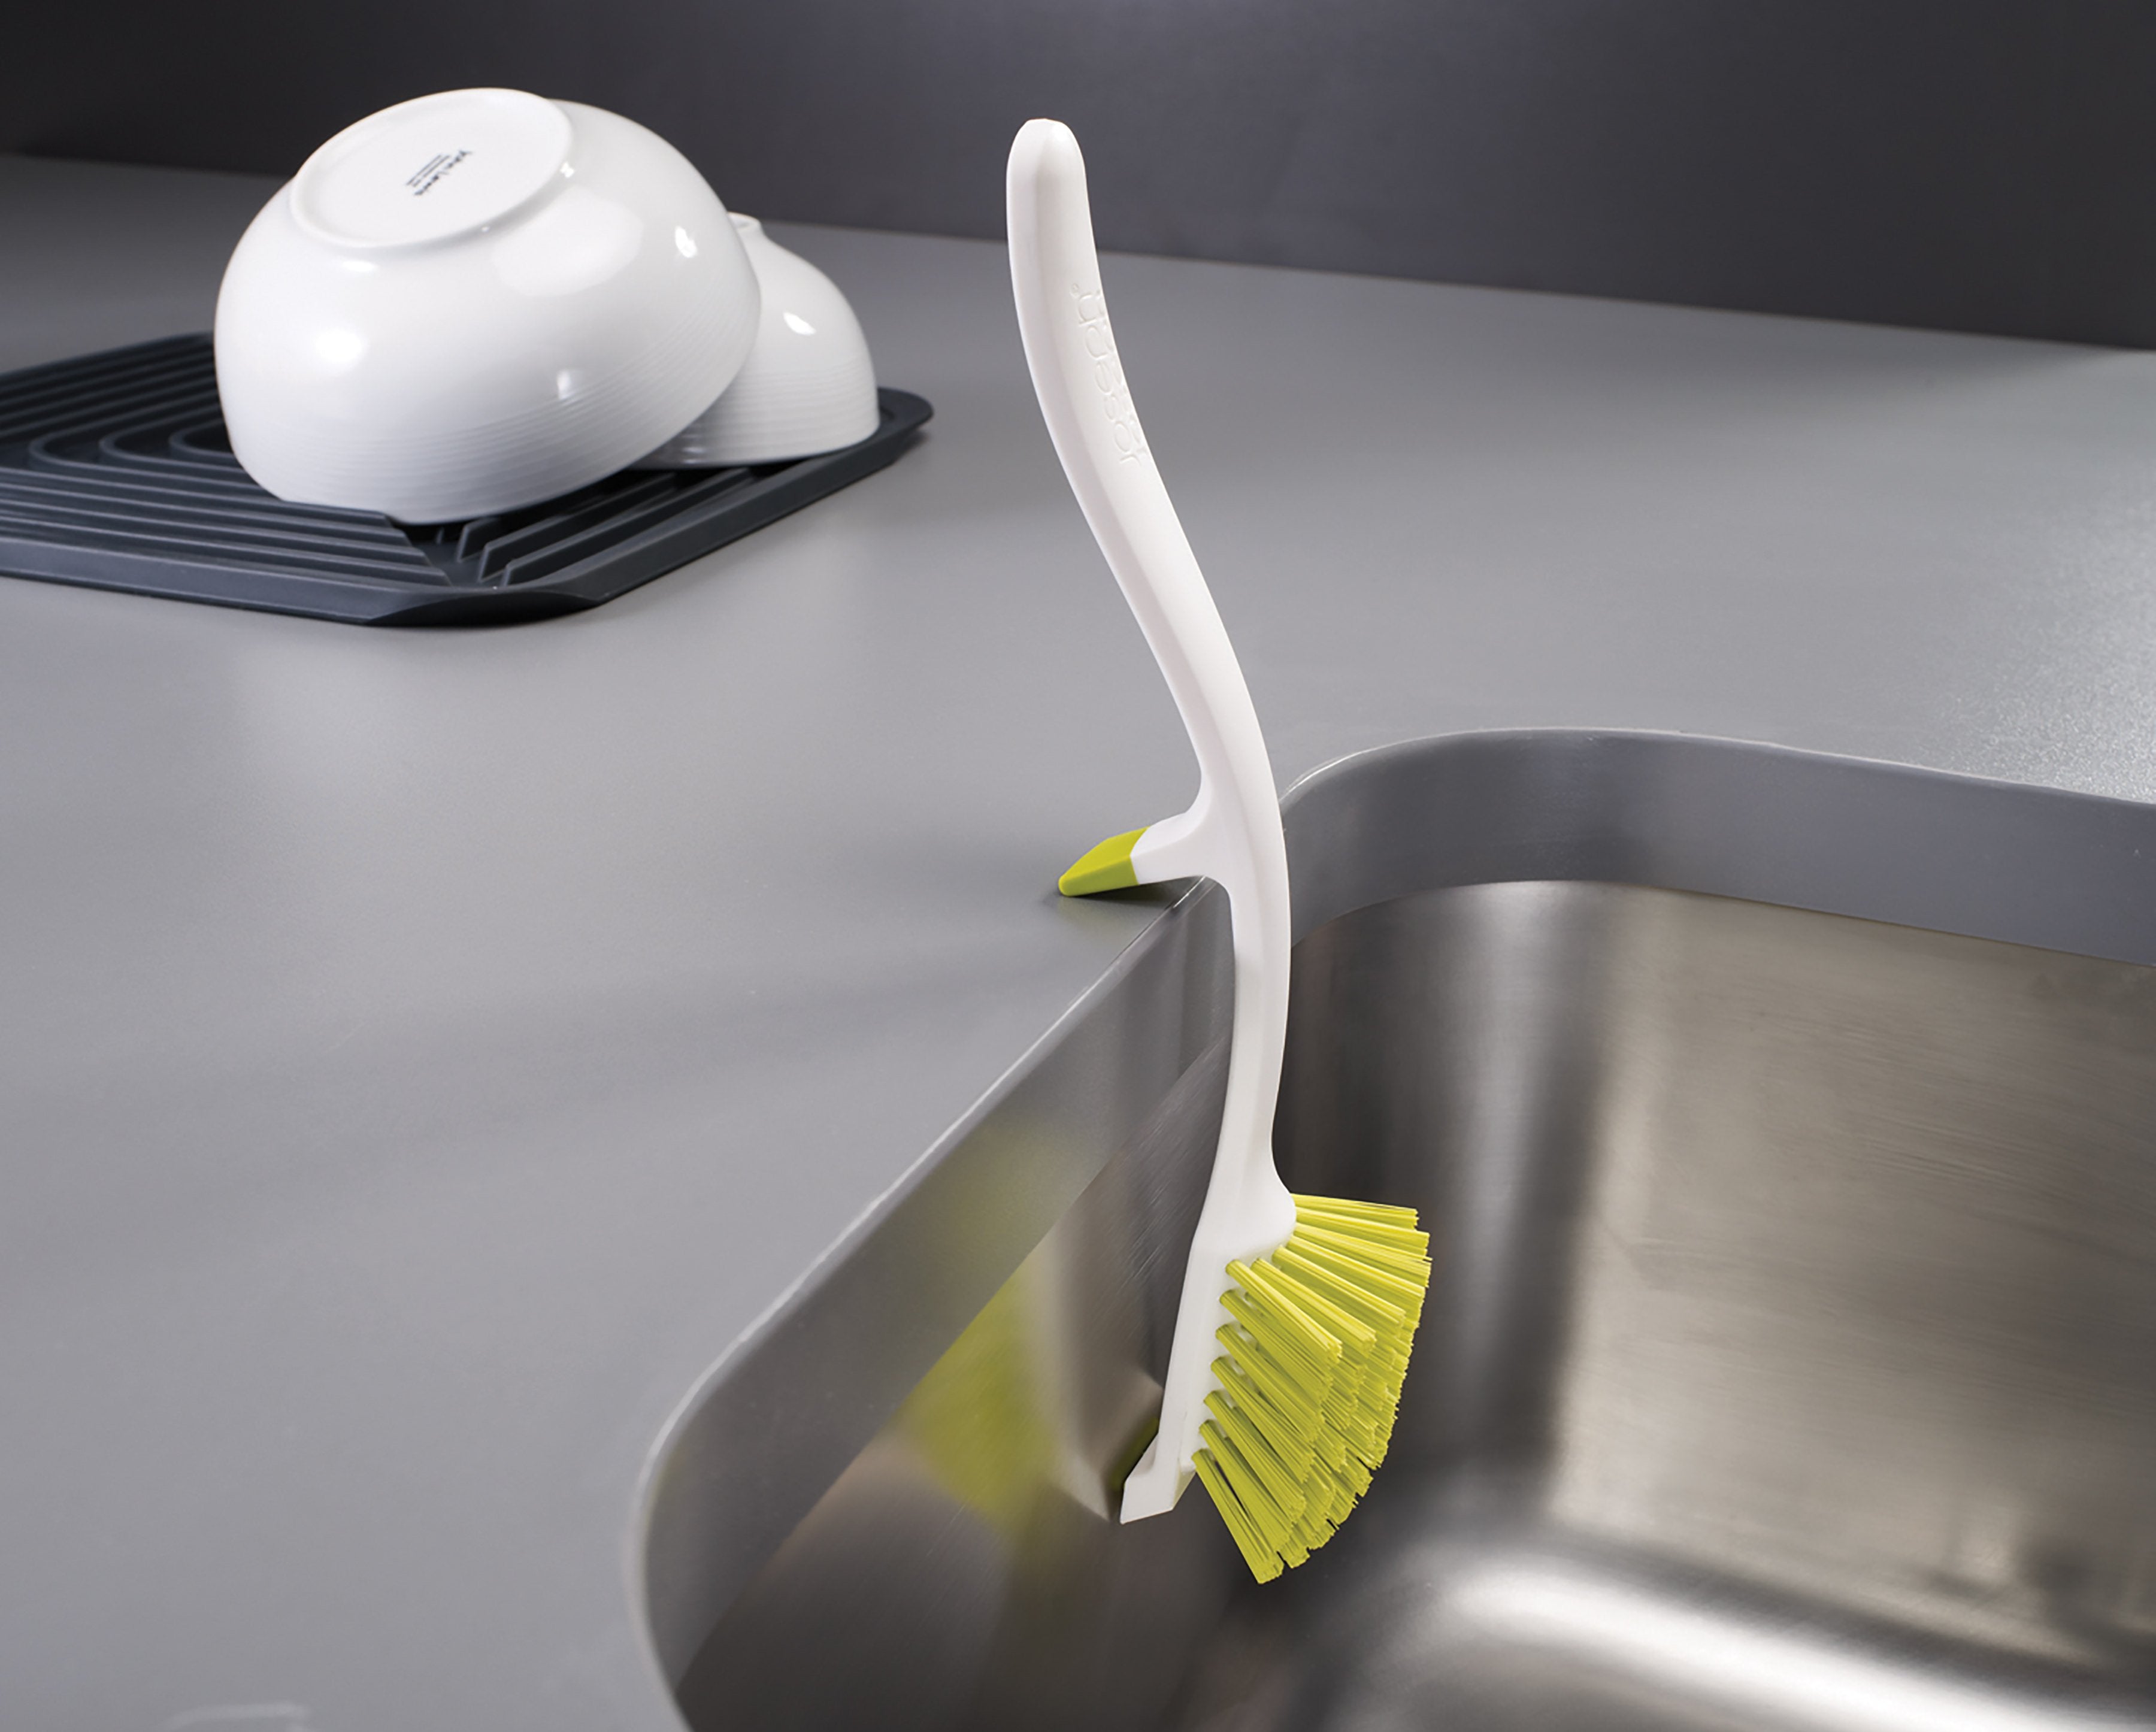 BEON.COM.AU  This clever washing-up brush is designed to rest securely on the side of your sink, letting all the soapy suds simply drain away.  Washing-up brush with integrated sink rest Non-scratch, curved brush head with integrated pan scraper Excess water drains directly into sink Non-slip resting point g... Joseph Joseph at BEON.COM.AU